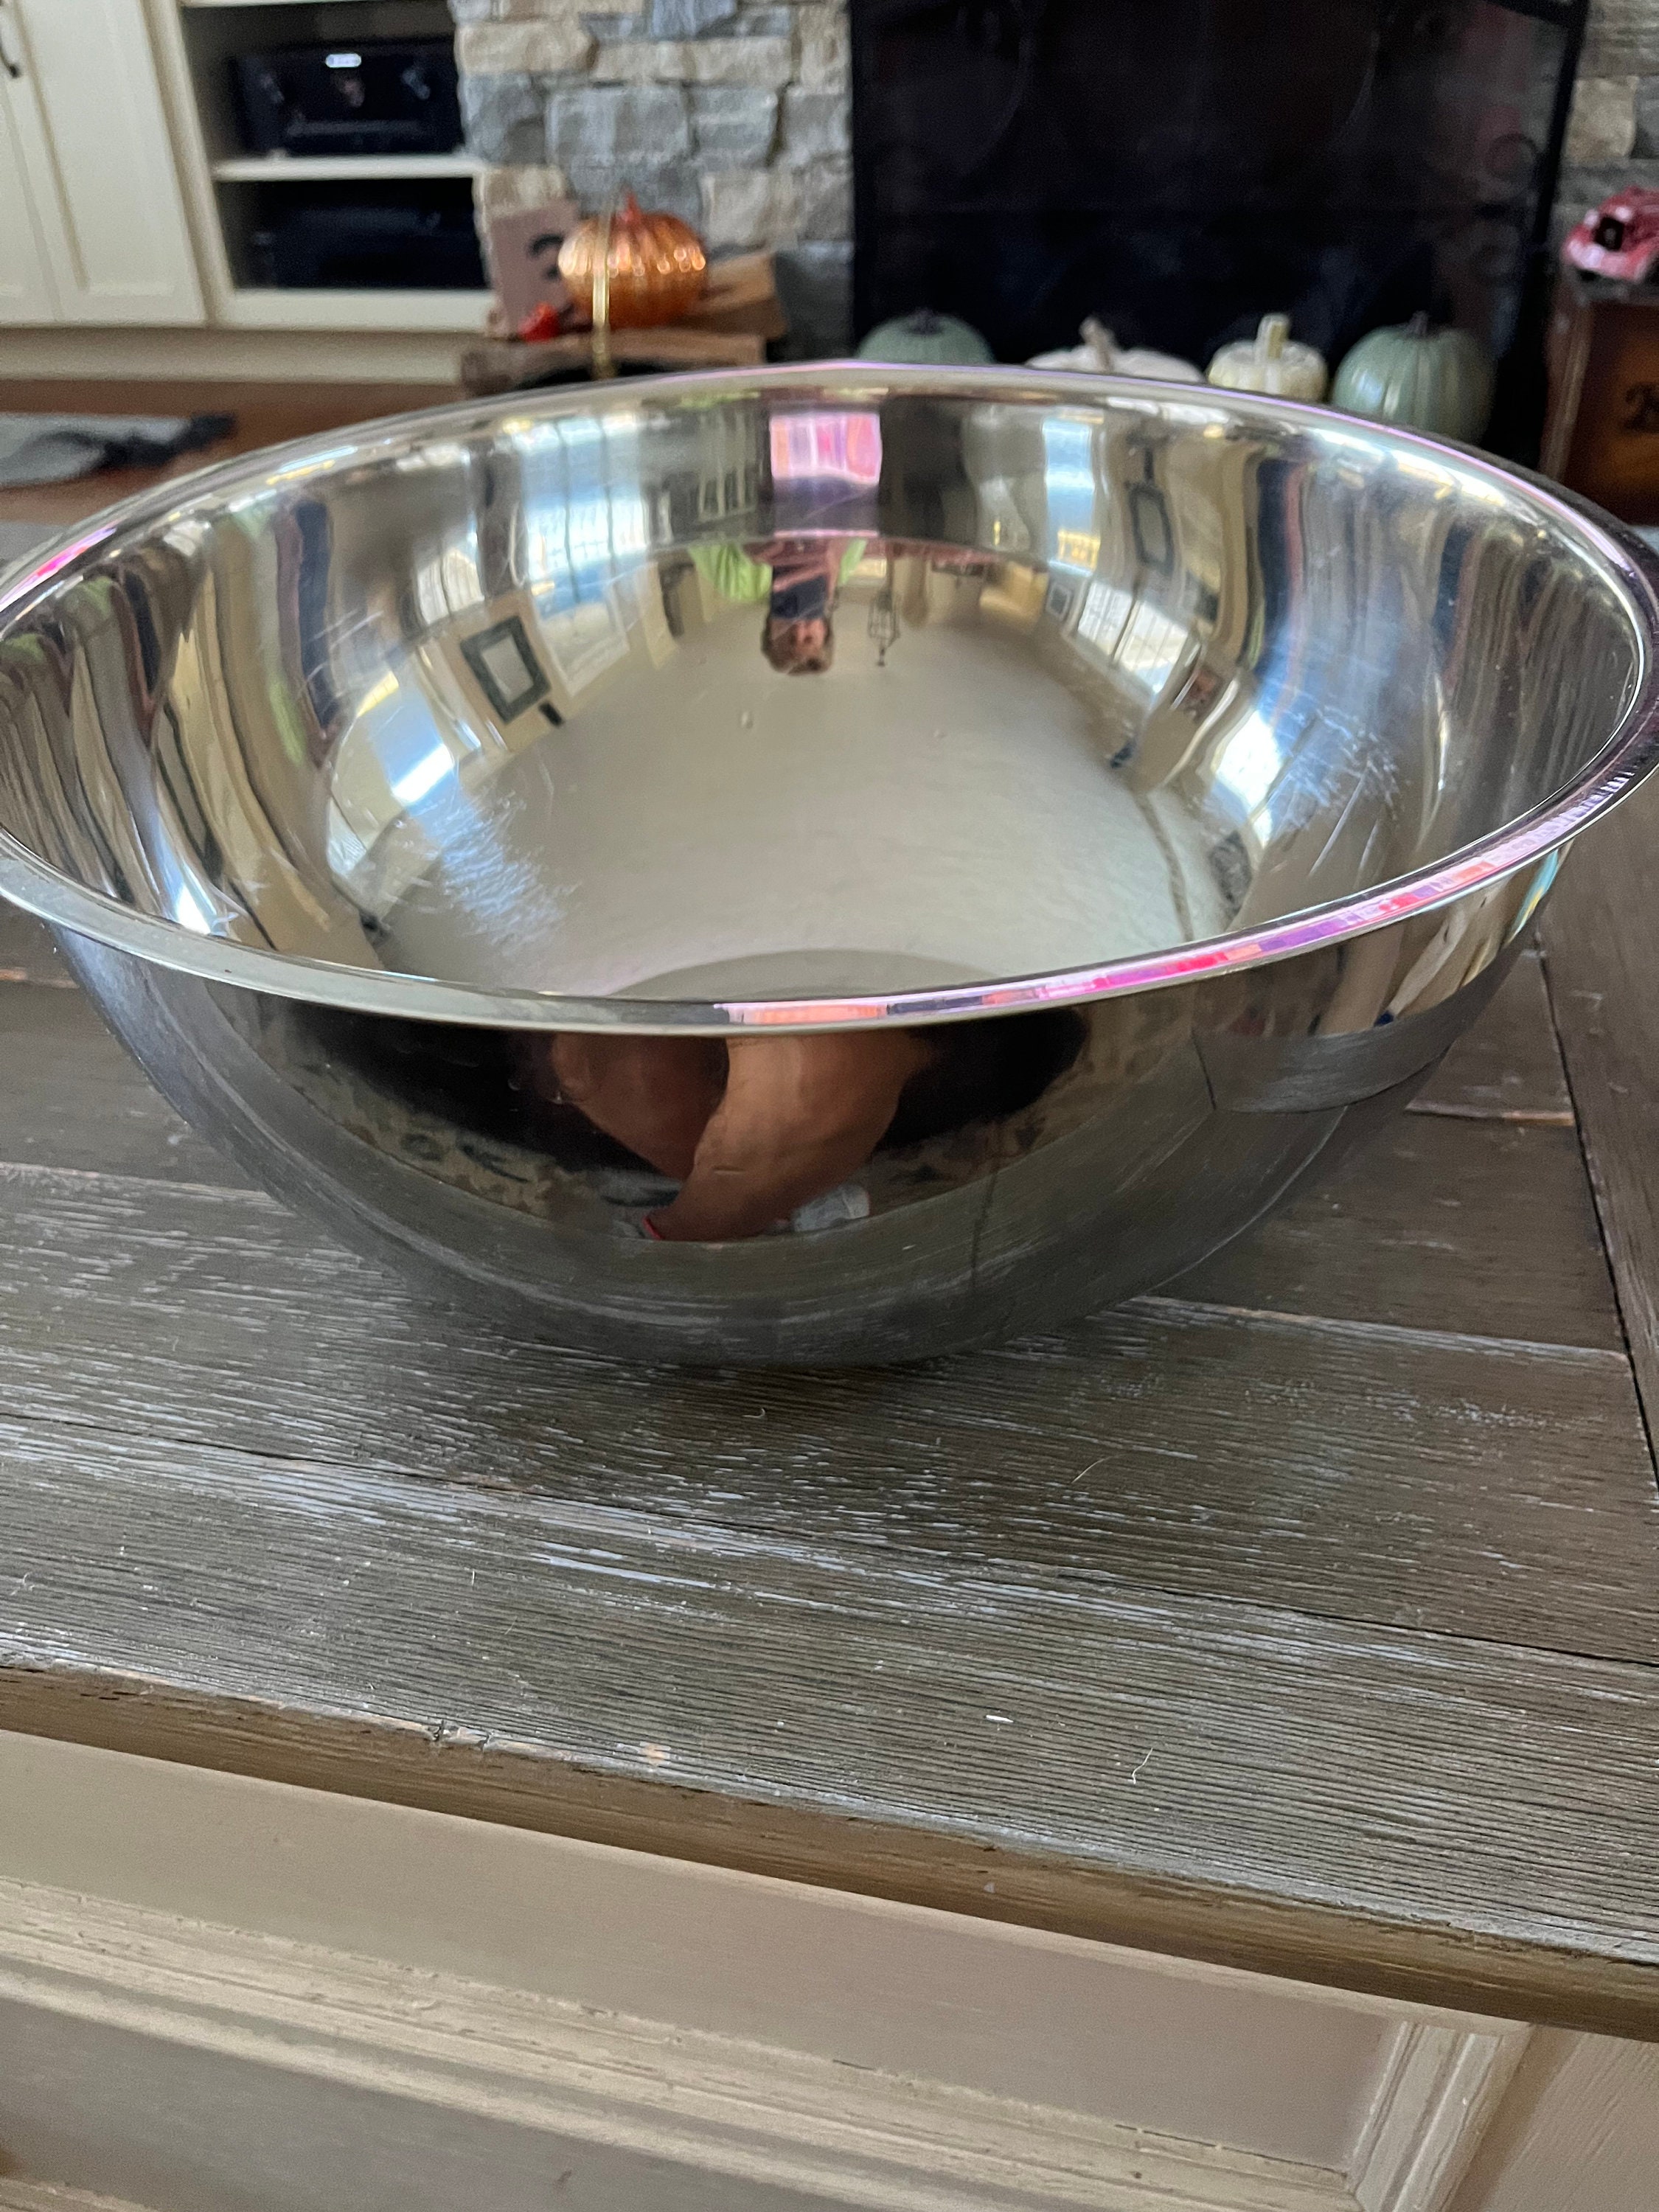 1 Set Stainless Steel Mixing Bowl Large Mixing Bowl Kitchen Stainless Steel Soup Bowl with Lid, Size: 16x16cm